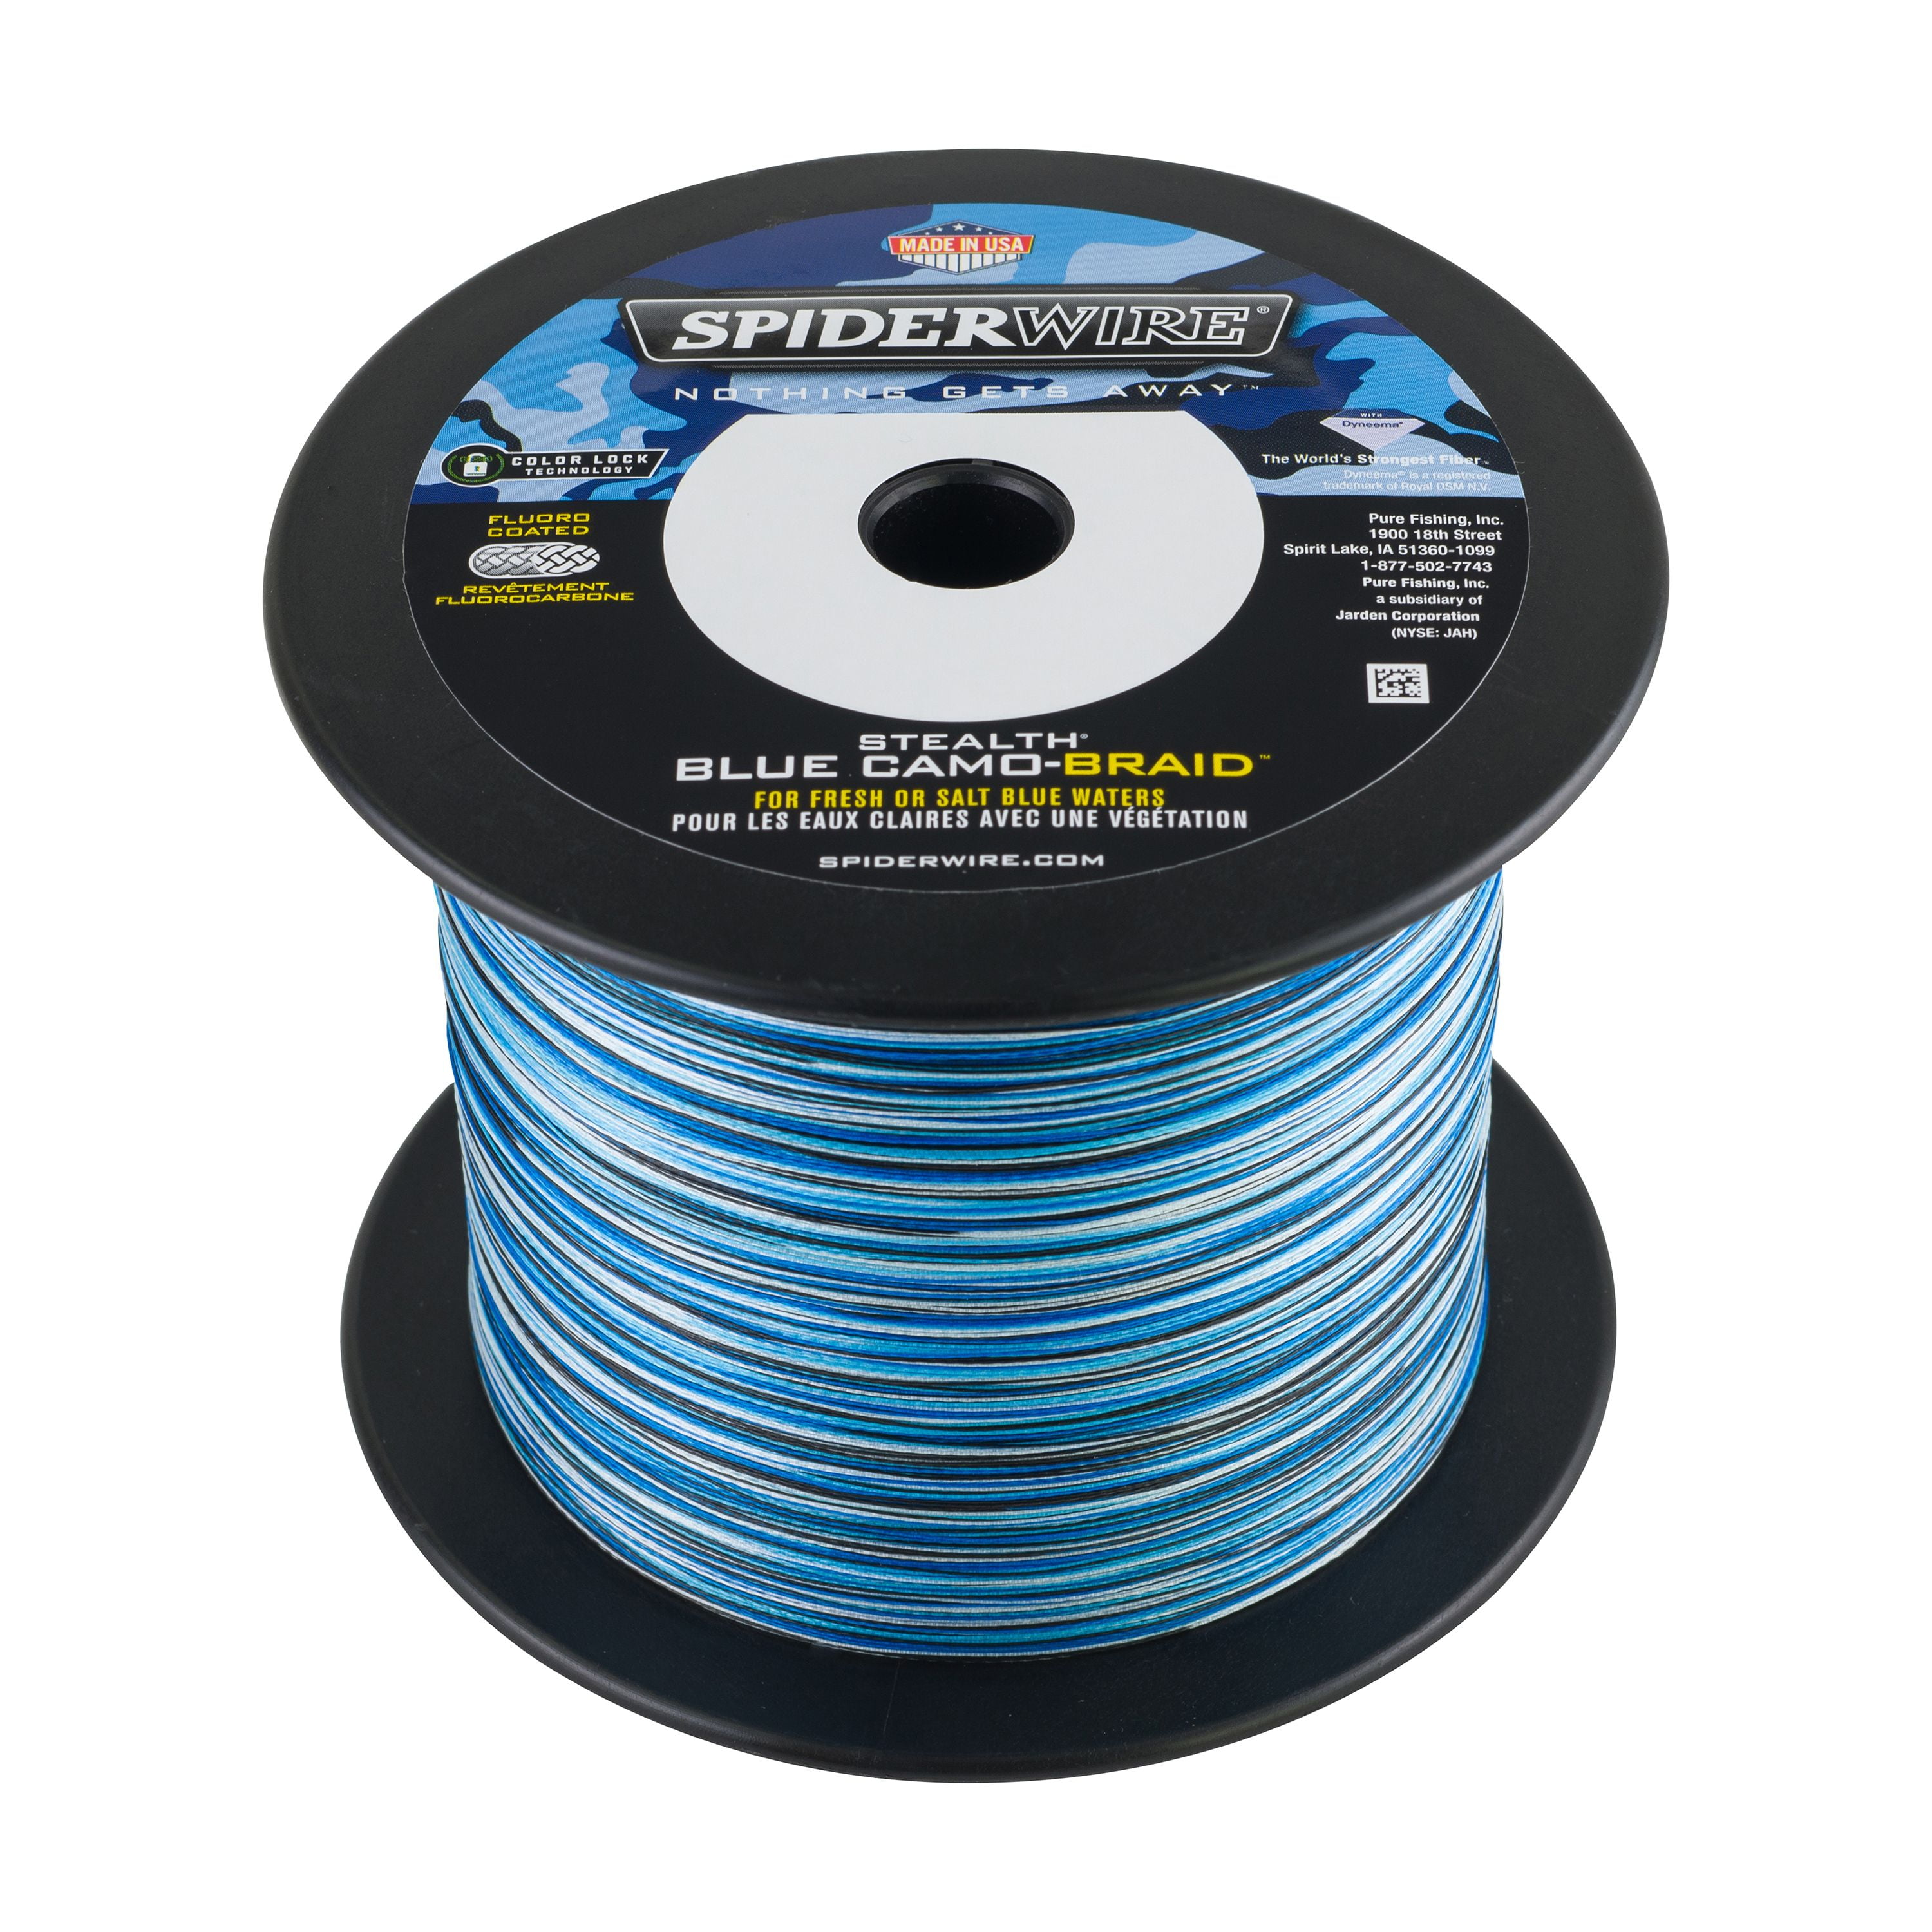 Details about   SpiderWire Stealth Superline Fishing Line 40lb 300yd Glow-Vis Green 